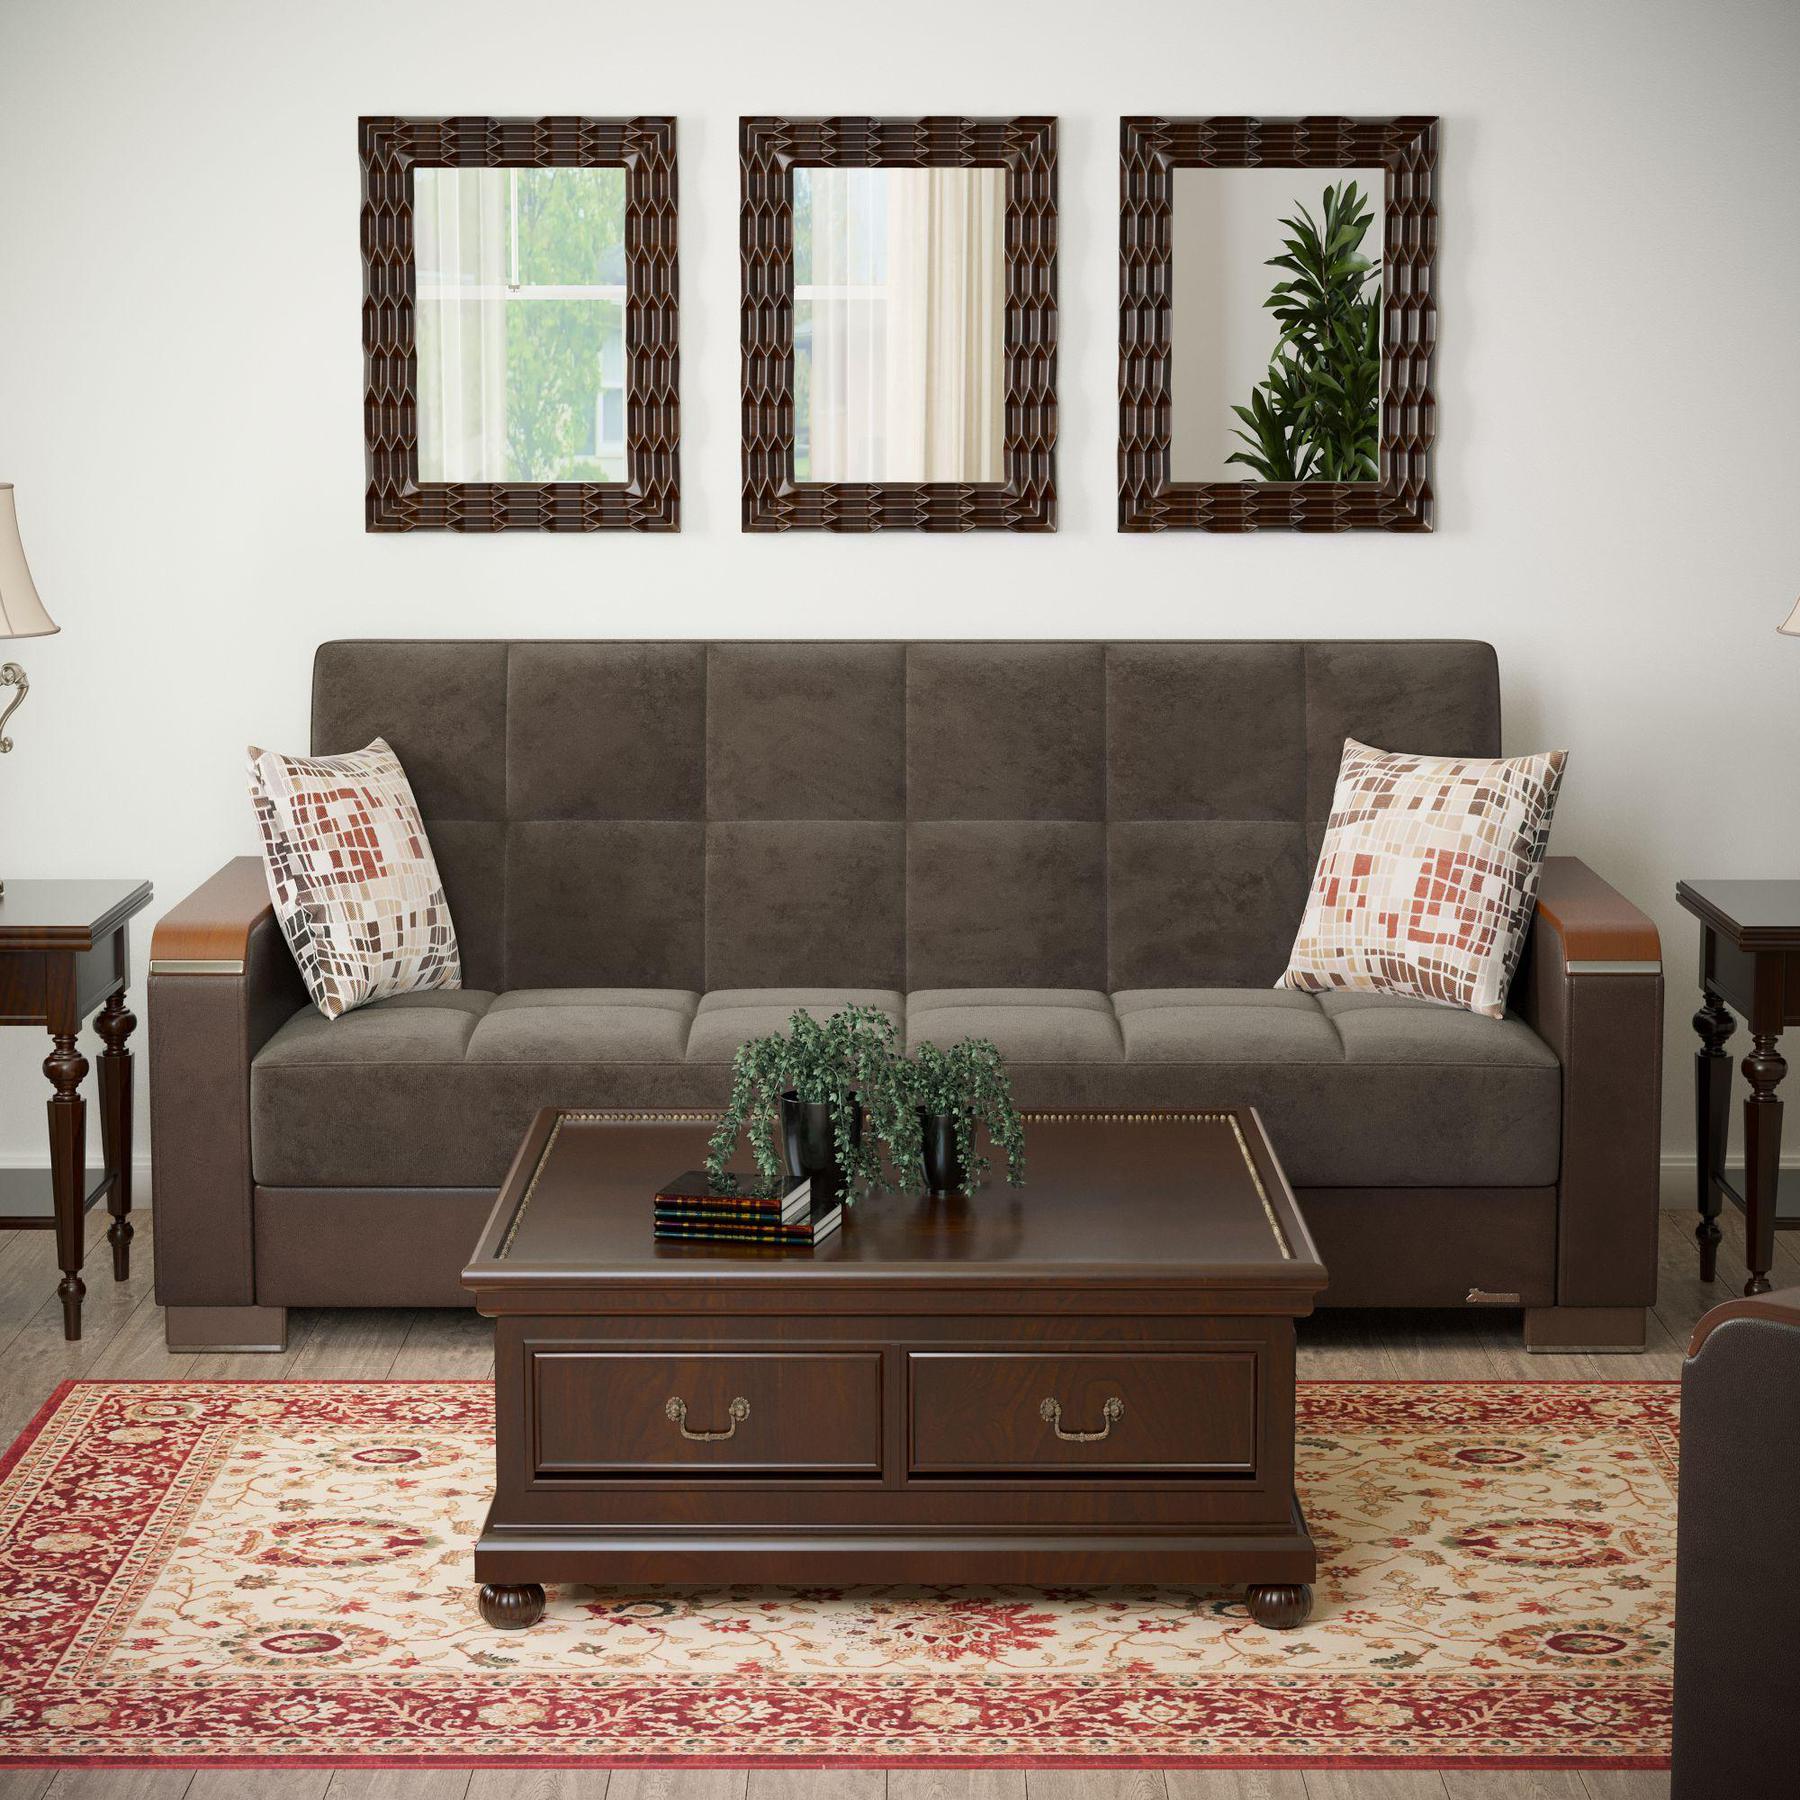 Modern design, Friar Brown, Dark Brown , Microfiber, Artificial Leather upholstered convertible sleeper Sofabed with underseat storage from Voyage Luxe by Ottomanson in living room lifestyle setting by itself. This Sofabed measures 90 inches width by 36 inches depth by 41 inches height.